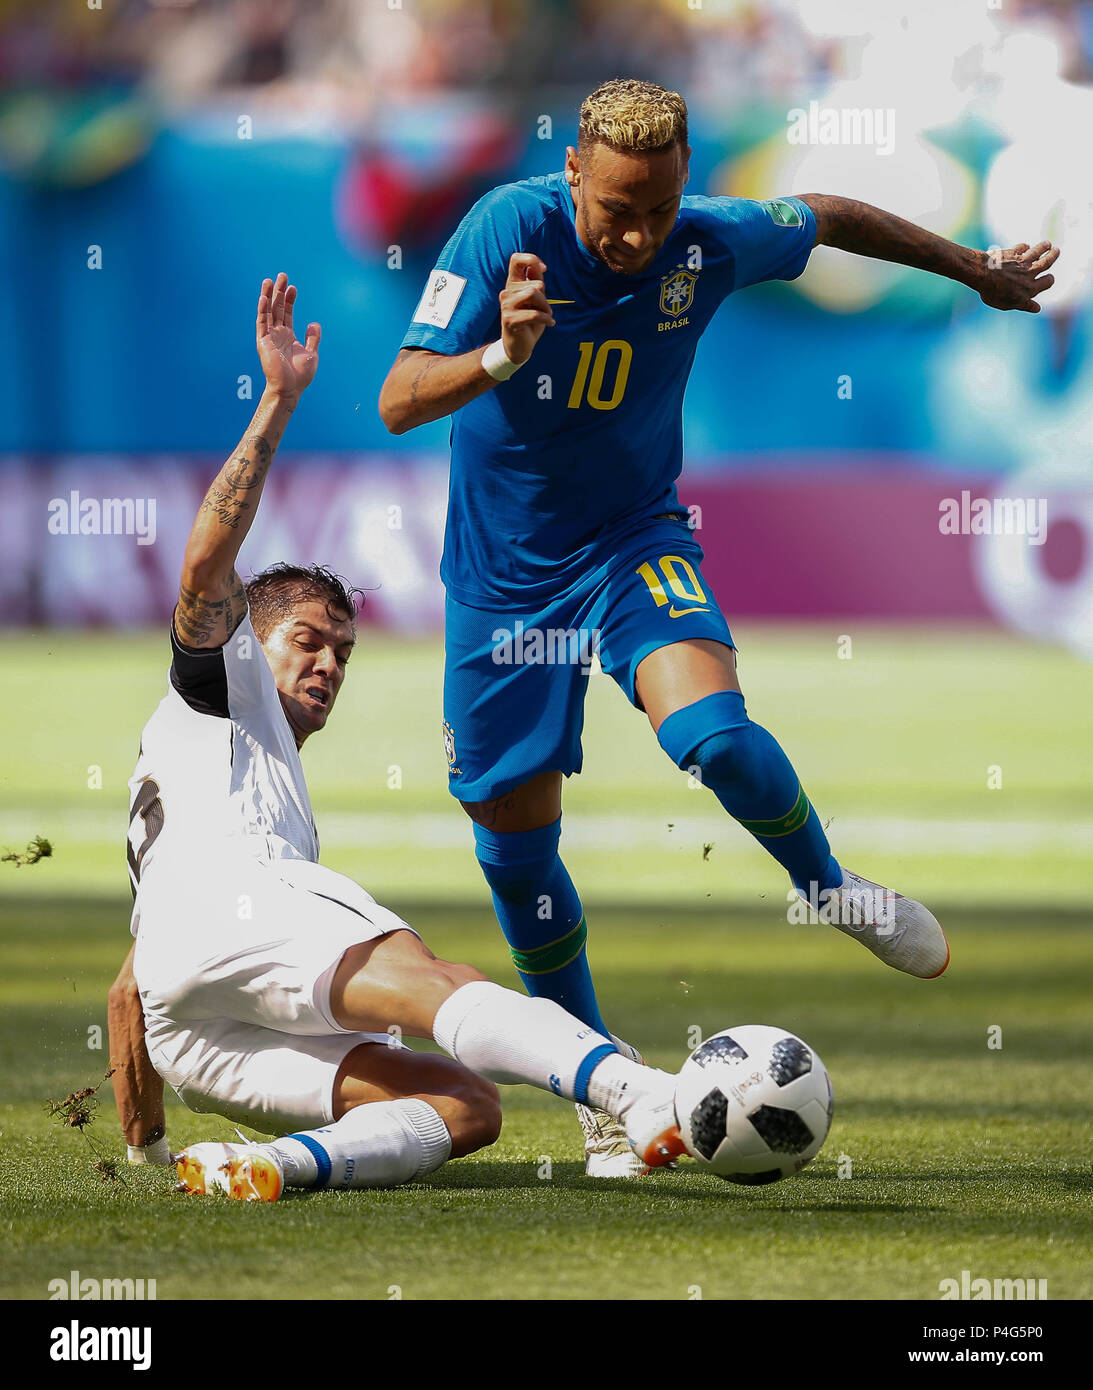 St Petersburg, Russia. 22 June 2018. BRAZIL VS. COSTA RICA Cristian Gamboa da Costa Ricadisputa ball with Neymar Jr. of Brazil during match between Brazil and Costa Rica valid for the second round of group E of the 2018 World Cup held at the Krestovsky Stadium (Zenit Arena) in St. Petersburg, Russia. (Photo: Marcelo Machado de Melo/Fotoarena) Credit: Foto Arena LTDA/Alamy Live News Stock Photo